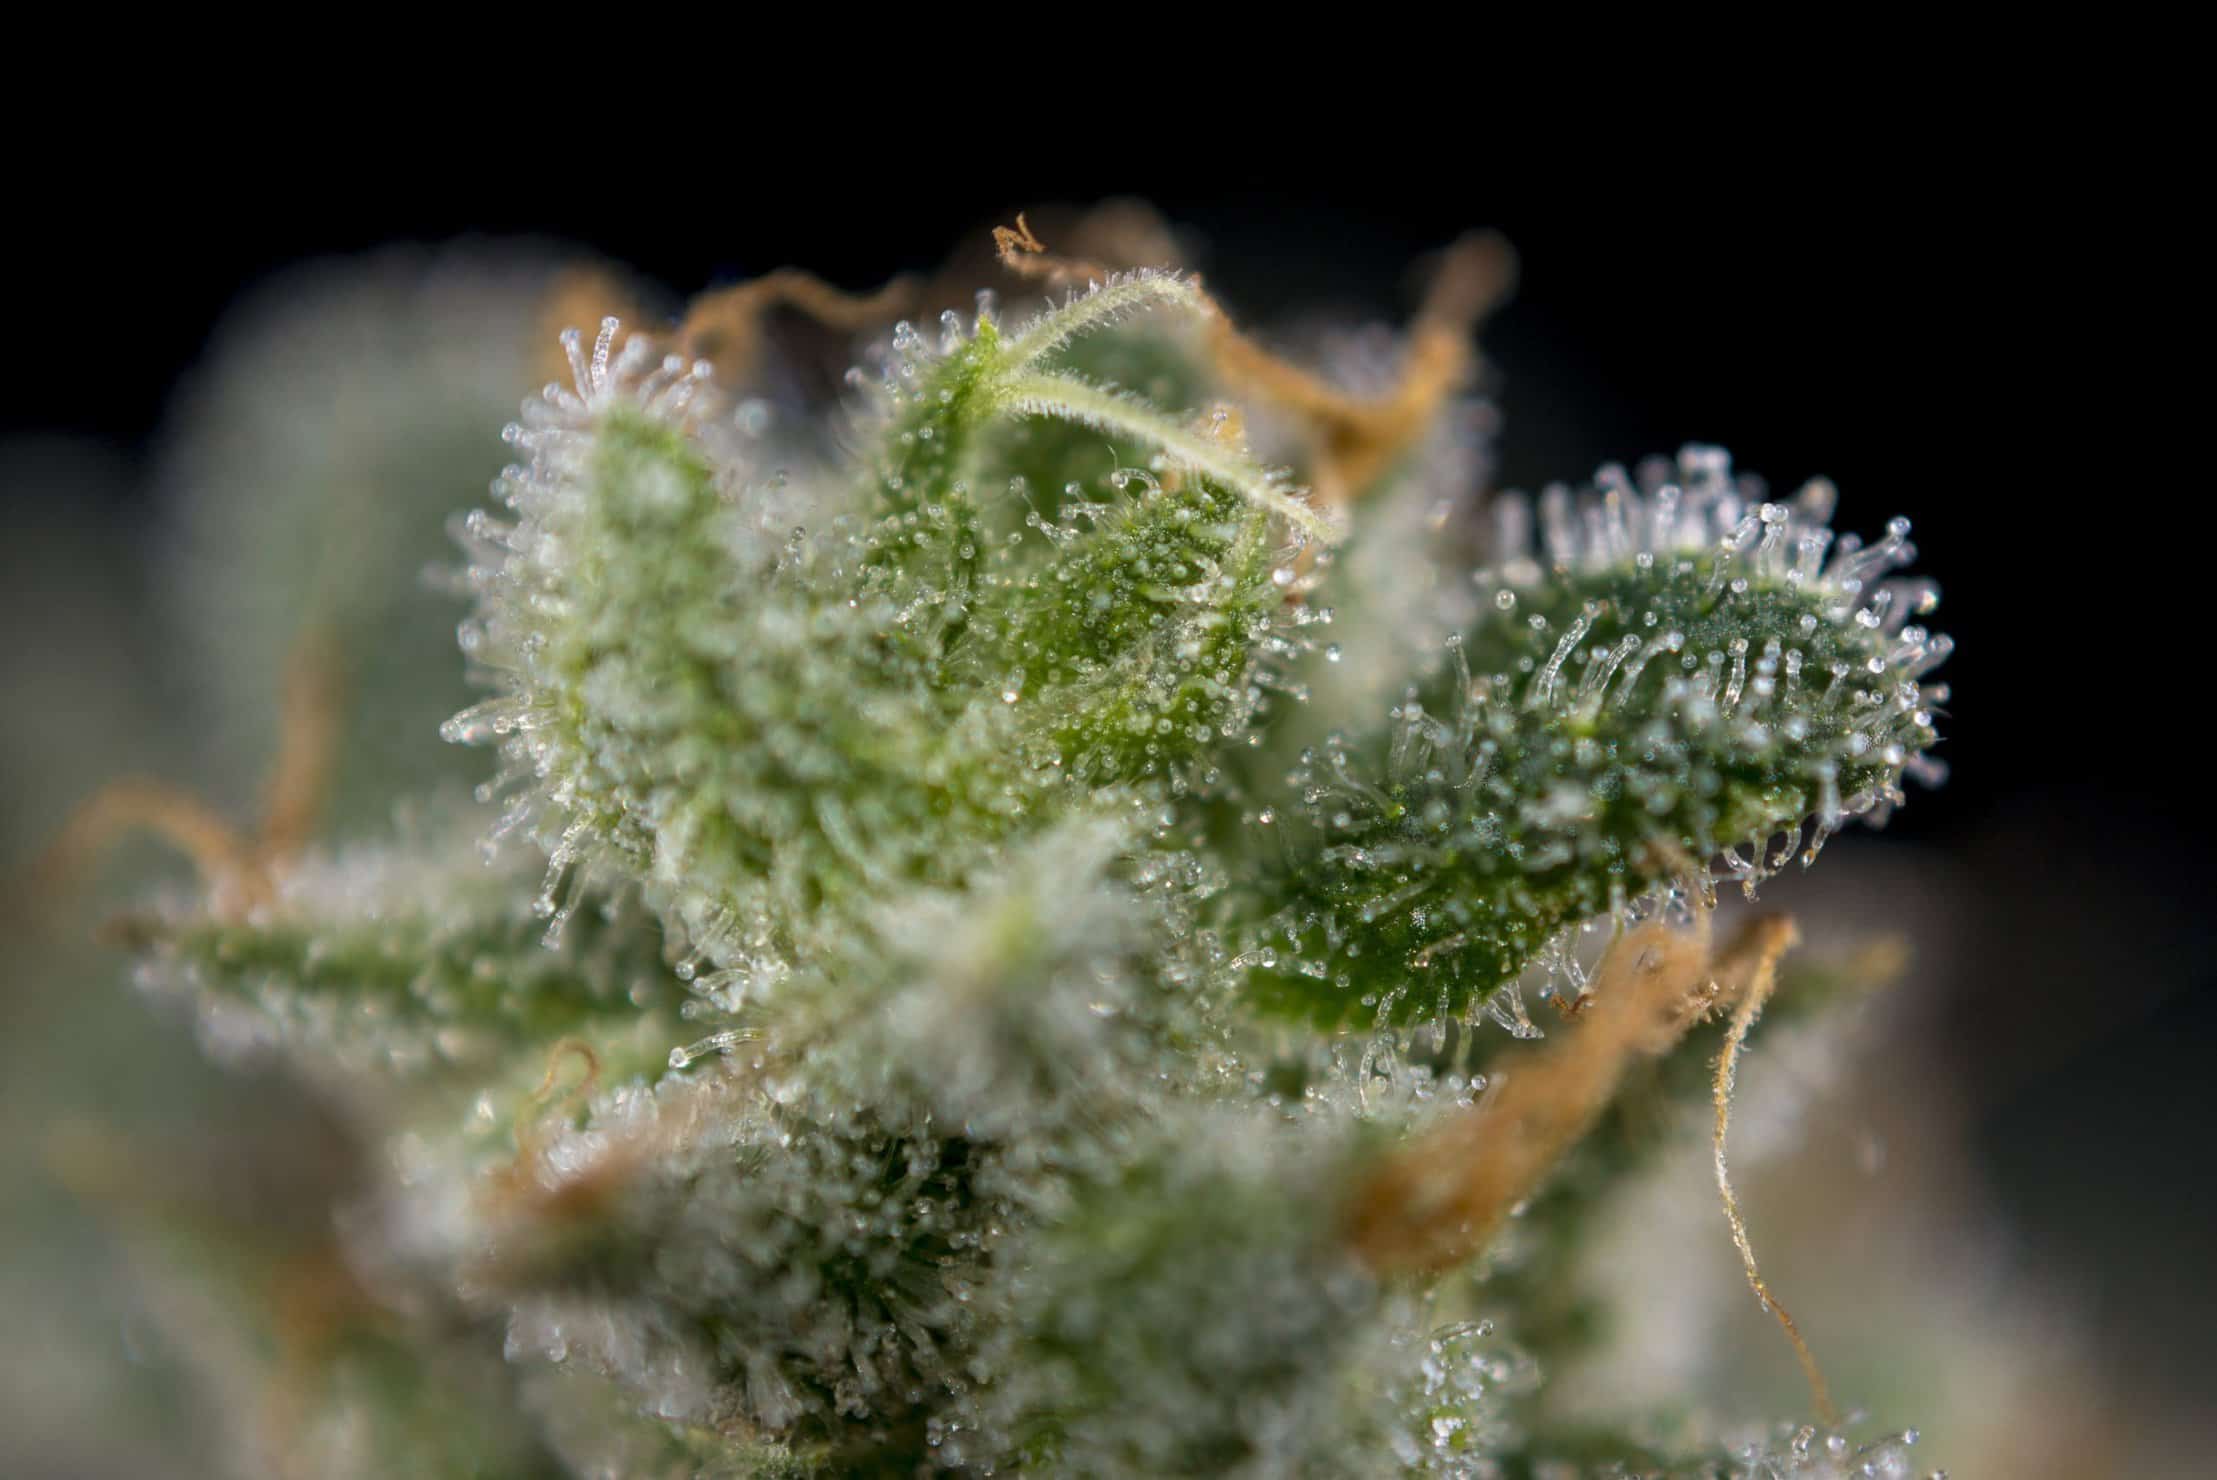 Controlling Potency of Your Cannabis Plants